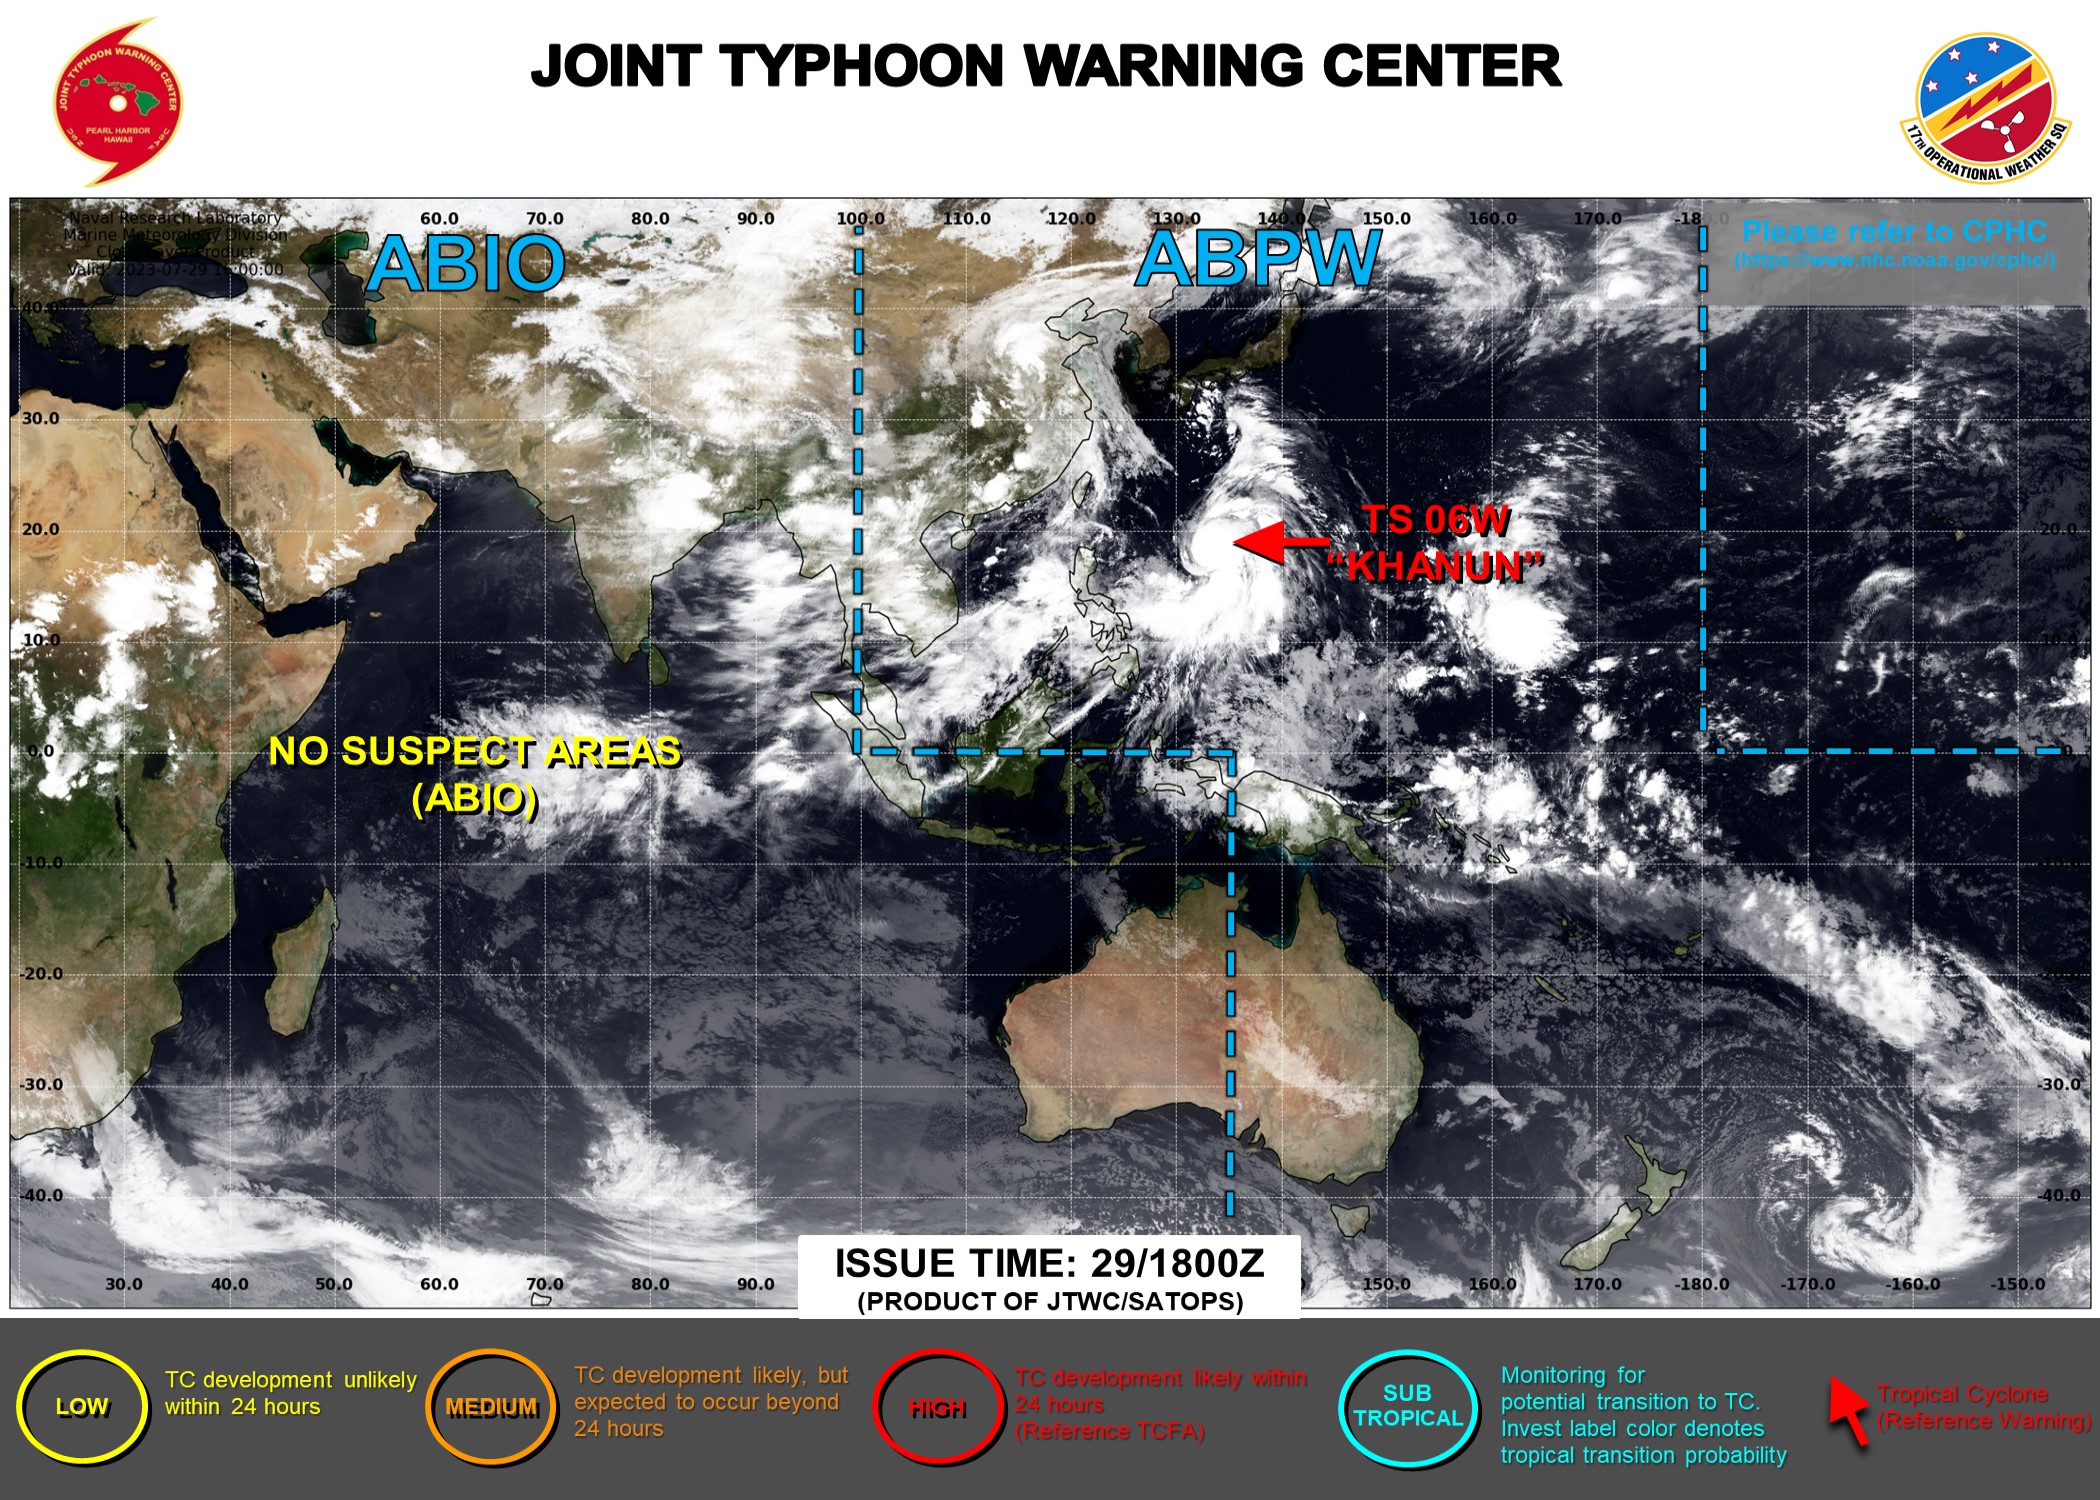 JTWC IS ISSUING 6HOURLY WARNINGS AND 3HOURLY SATELLITE BULLETINS TS 06W(KHANUN).